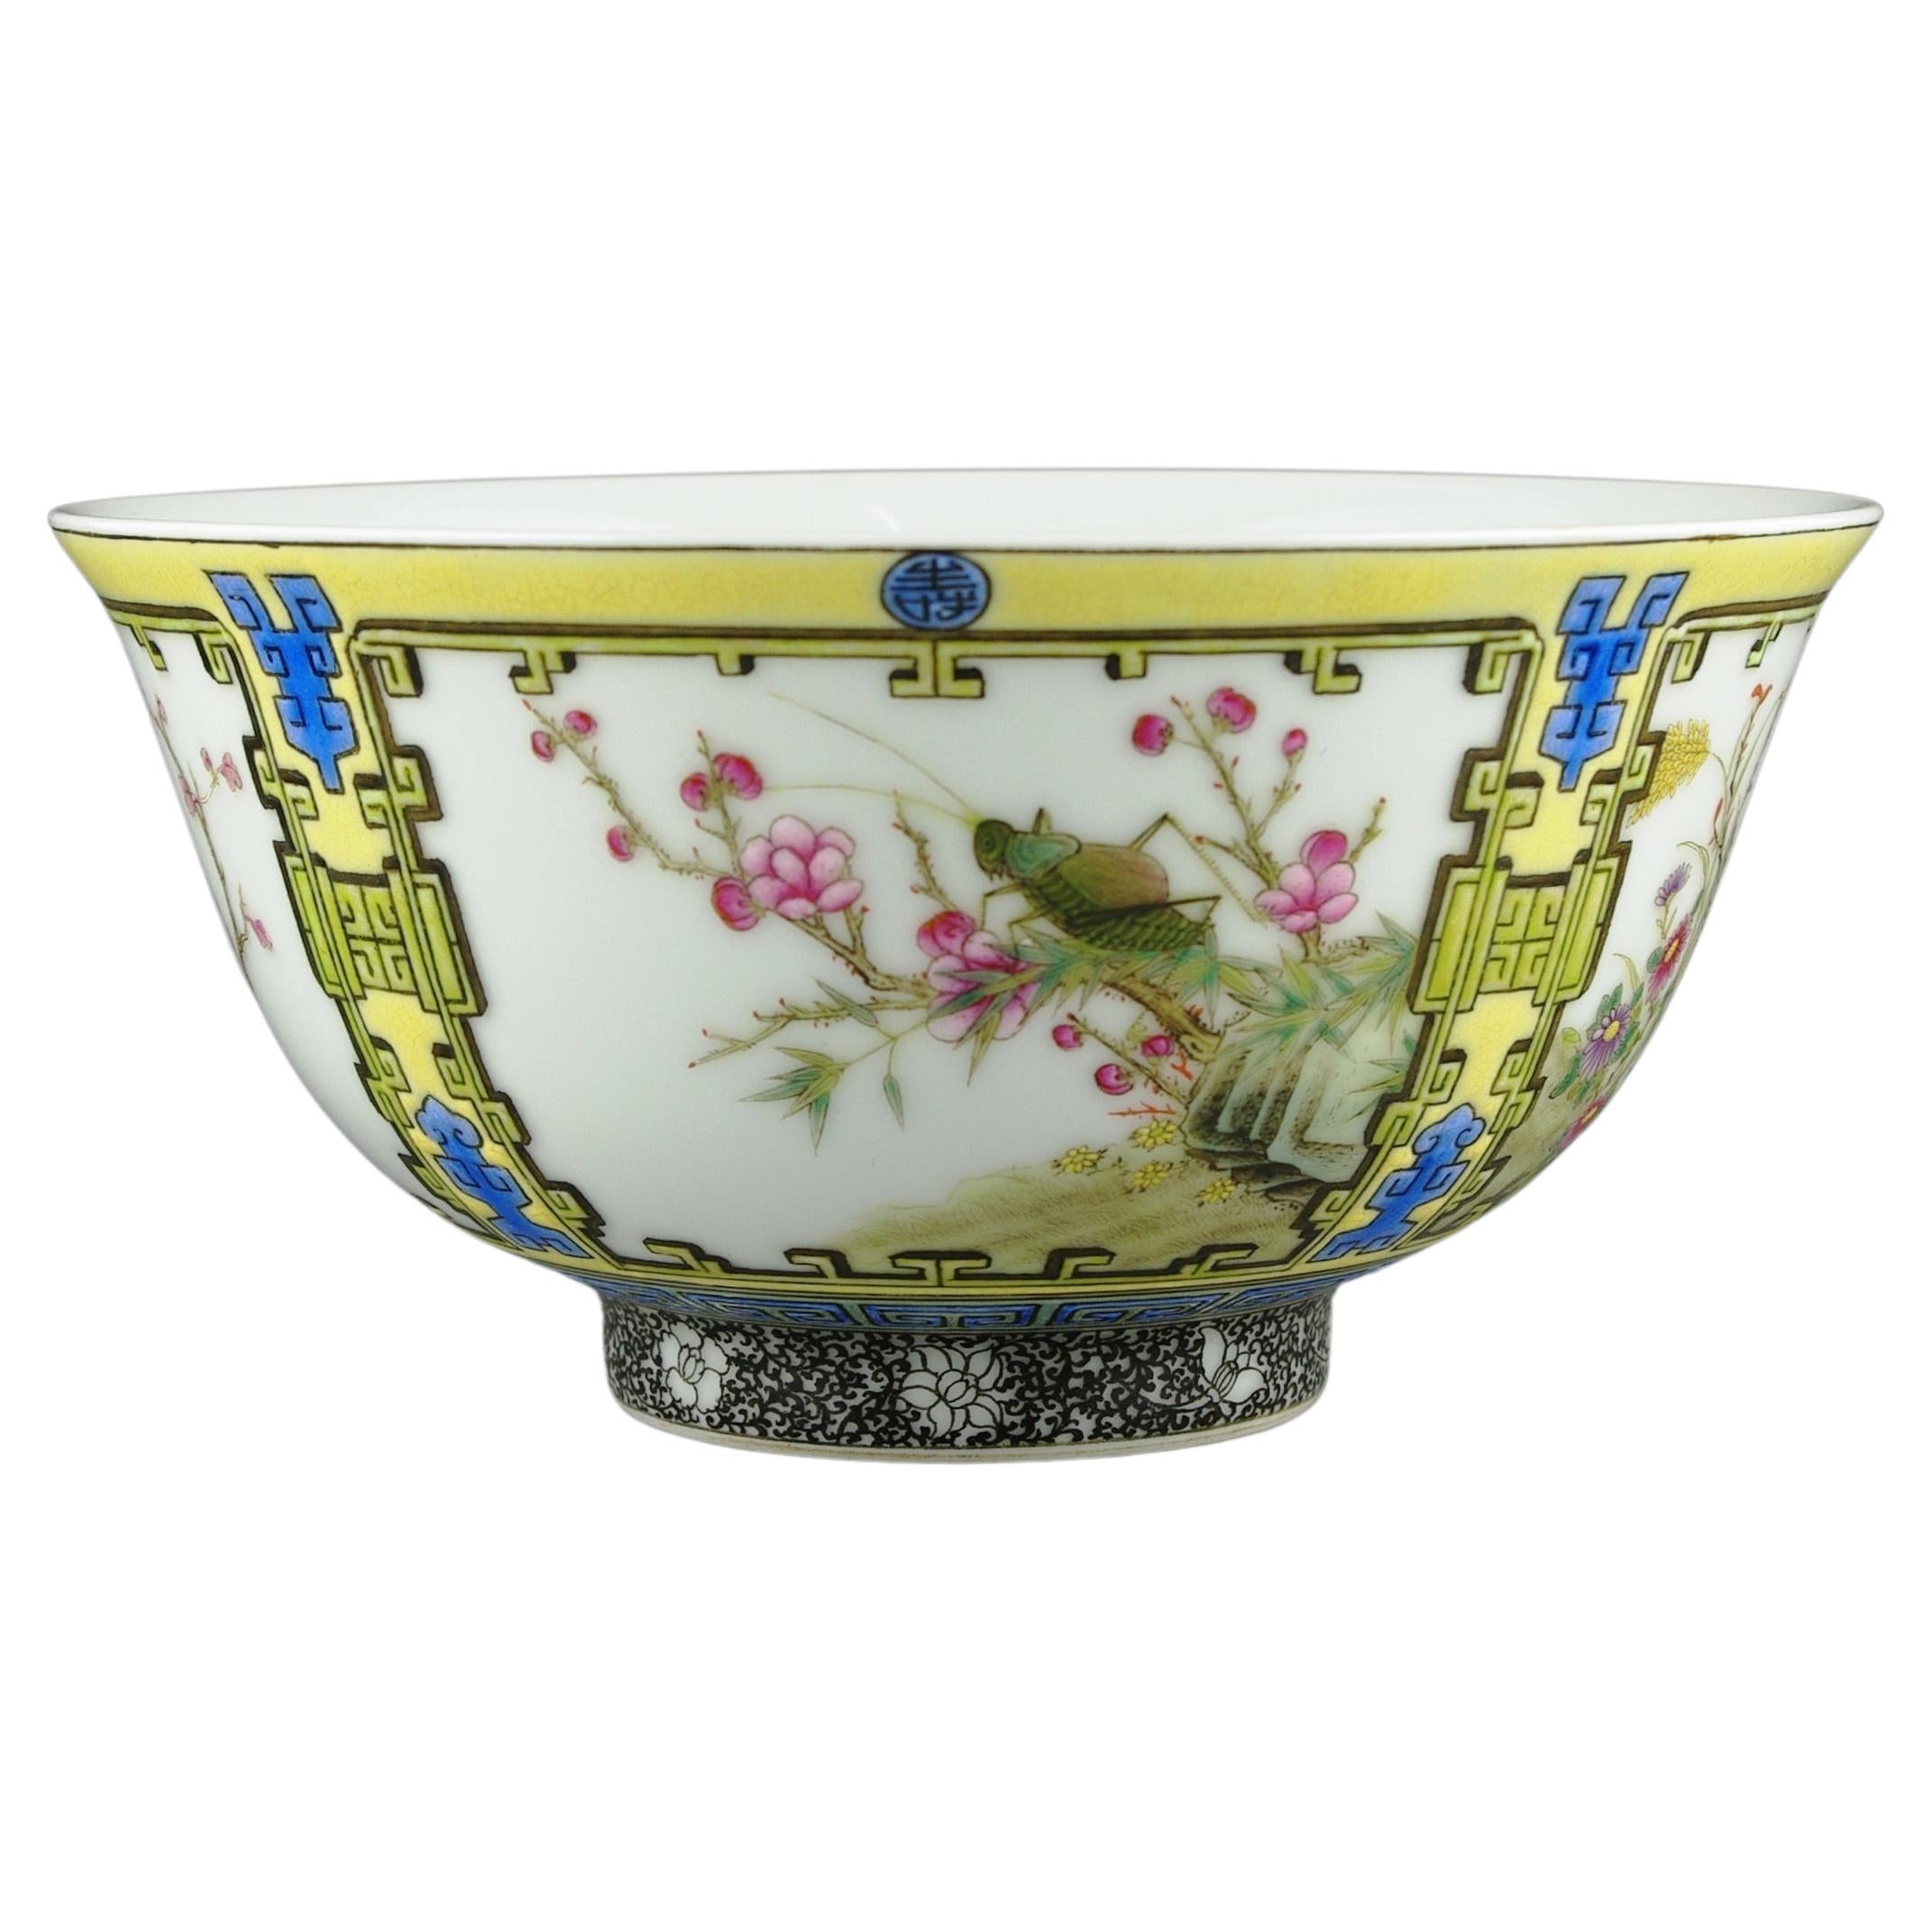 Fine Chinese Porcelain Famille Rose Insects Flowers on 4 Panels Yellow Bowl 20c In Excellent Condition For Sale In Richmond, CA